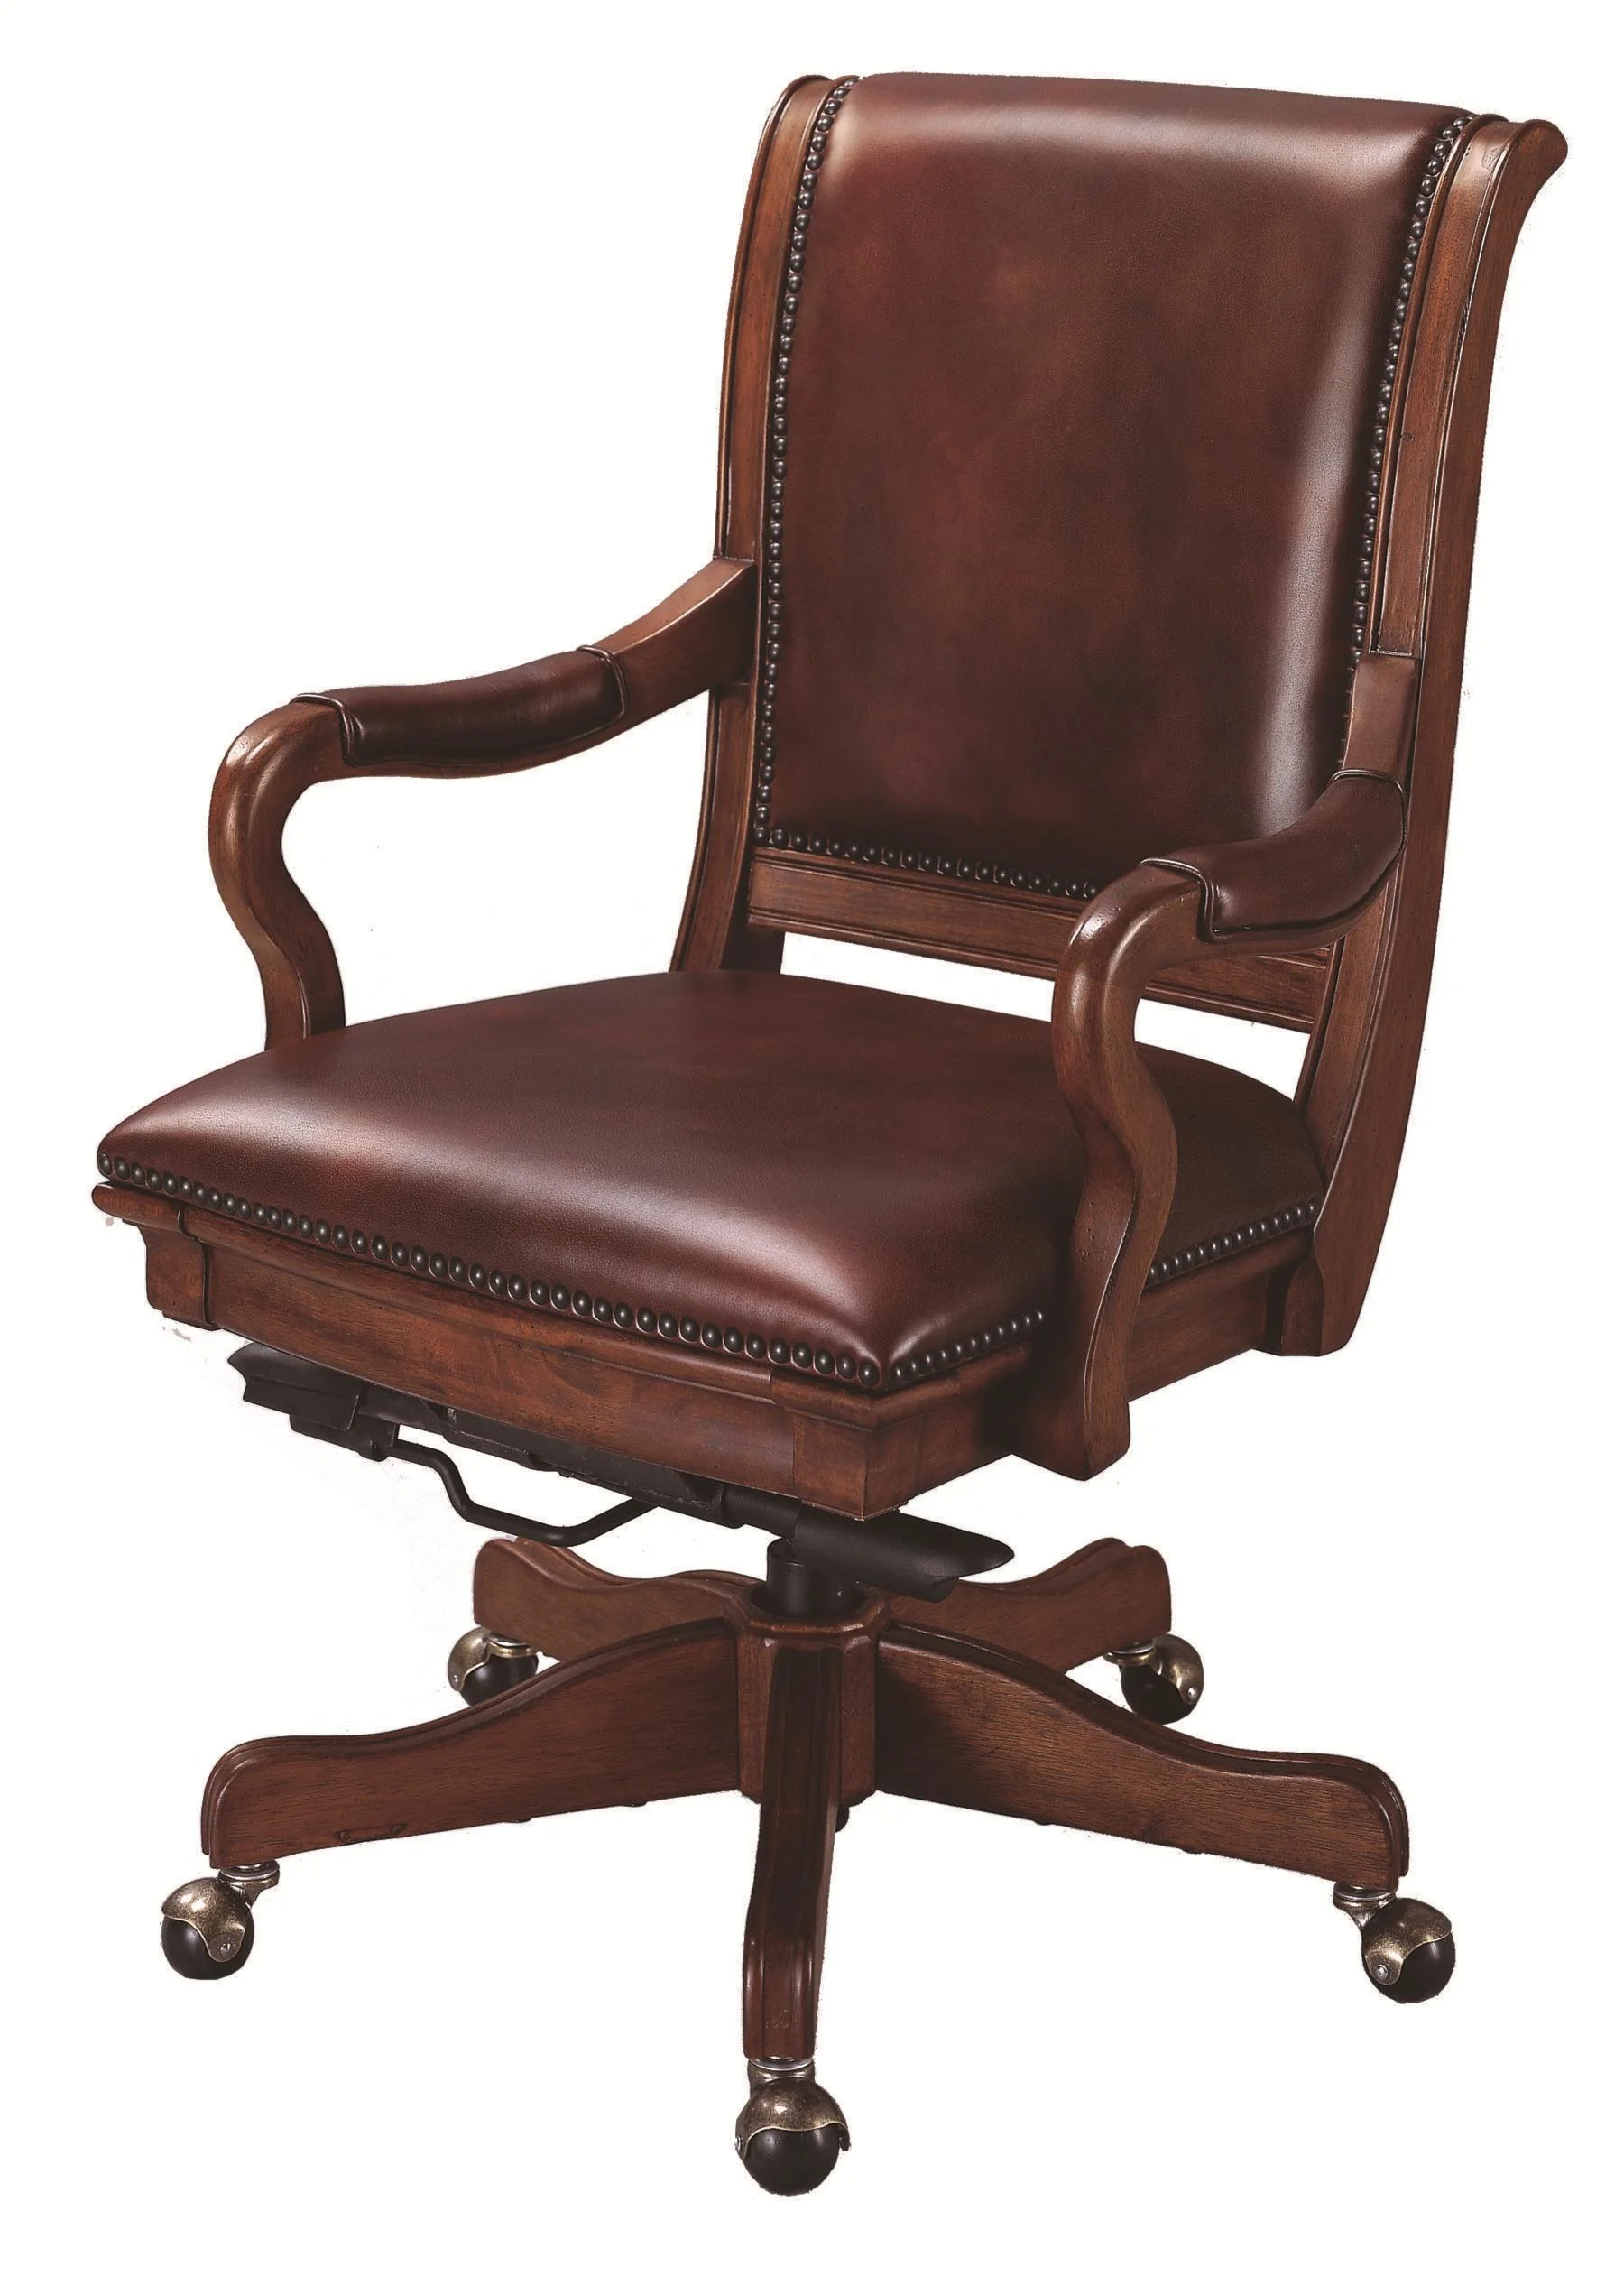 Aspenhome Richmond L85-269963 Leather Upholstered Caster Office Chair with  Adjustable Seat Height and Knee Tilt Features | Pilgrim Furniture City |  Chair - Executive Chairs